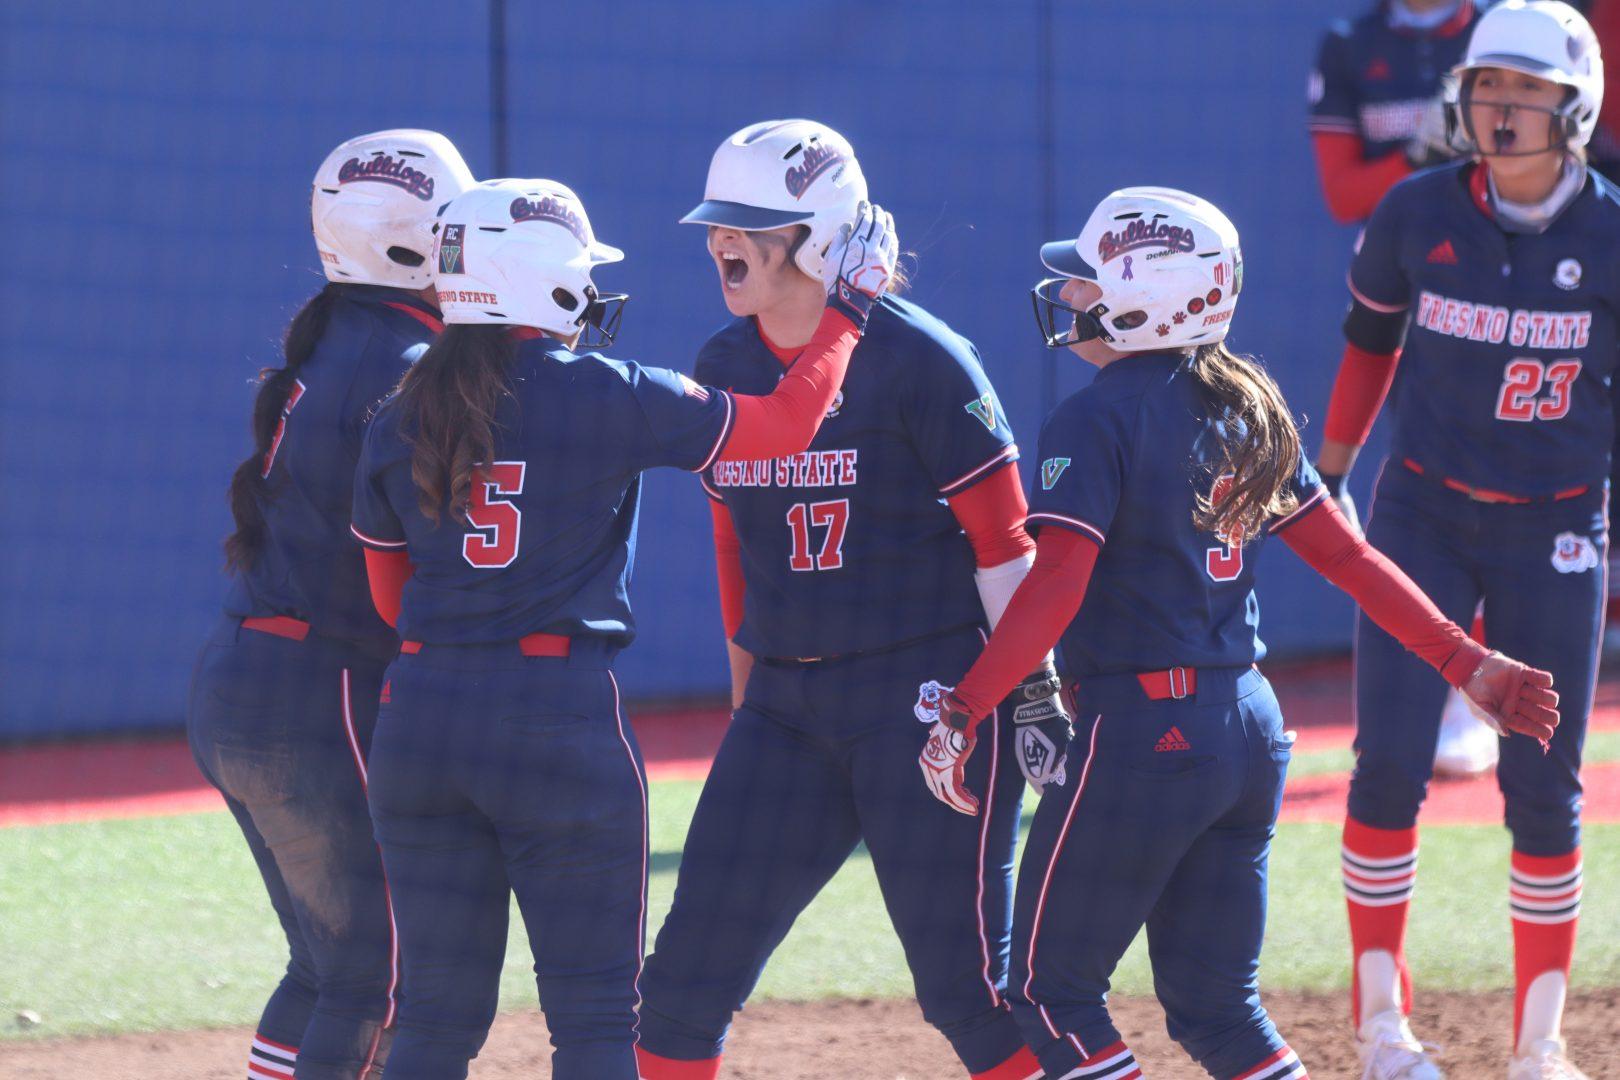 The+Fresno+State+Bulldogs+celebrate+after+catcher+Kelcey+Carrasco+%2817%29+hits+a+home+run+with+bases+loaded+during+their+game+against+San+Jose+State+at+Margie+Wright+Diamond+on+Saturday%2C+March+20%2C+2021.+%28Kameron+Thorn%2FThe+Collegian%29